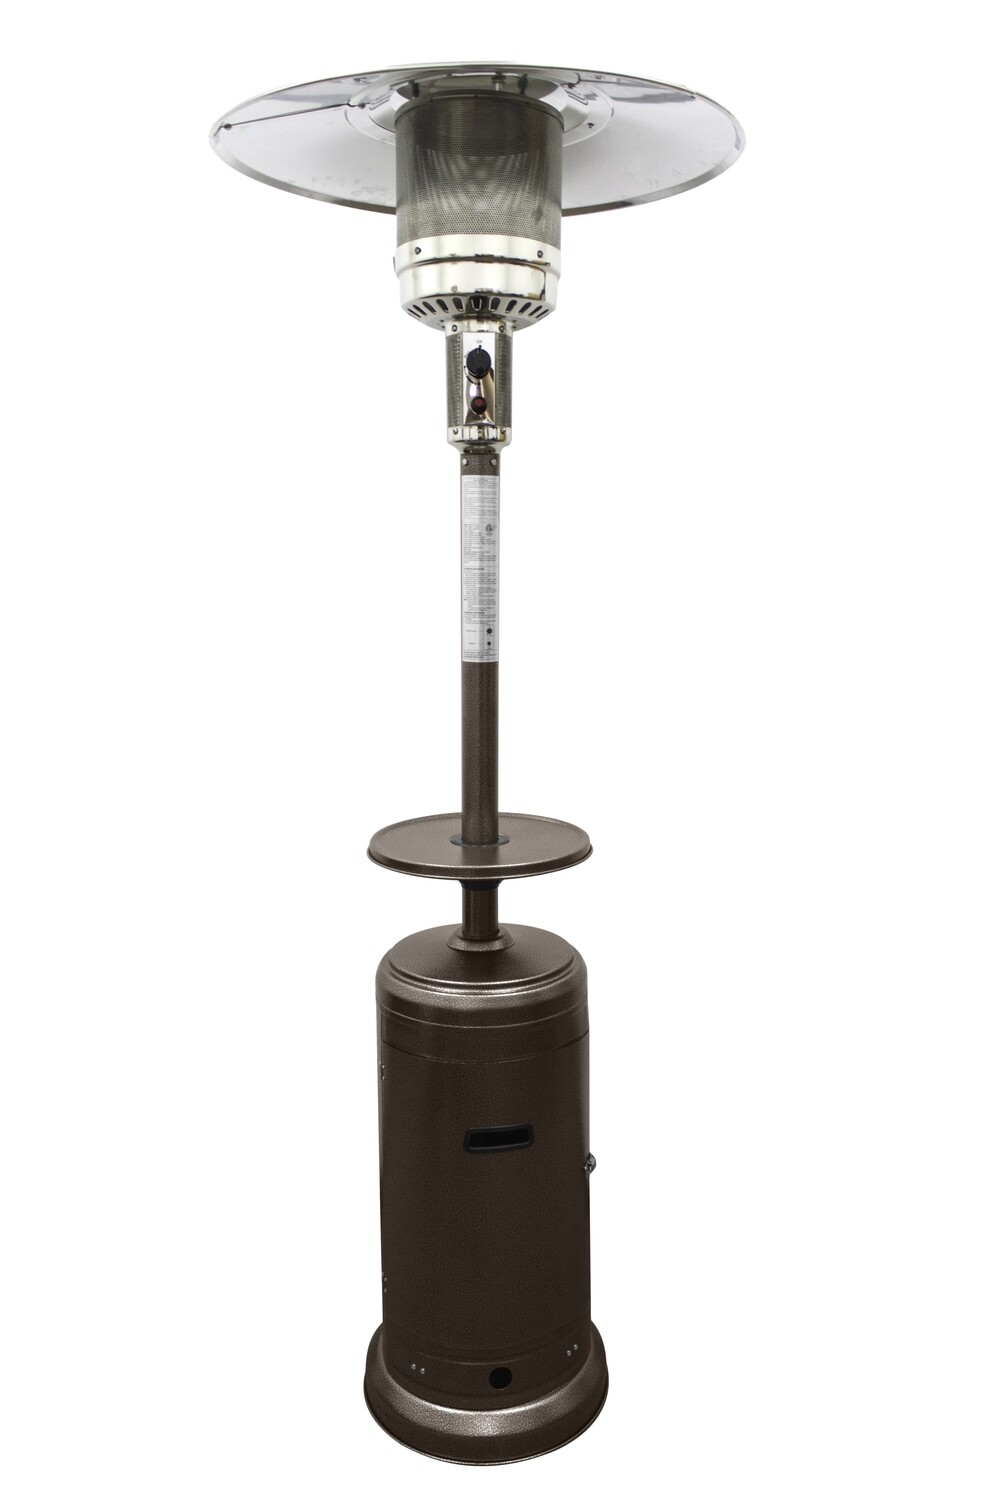 Residential Tall Patio Heater | Hammered Bronze Finish